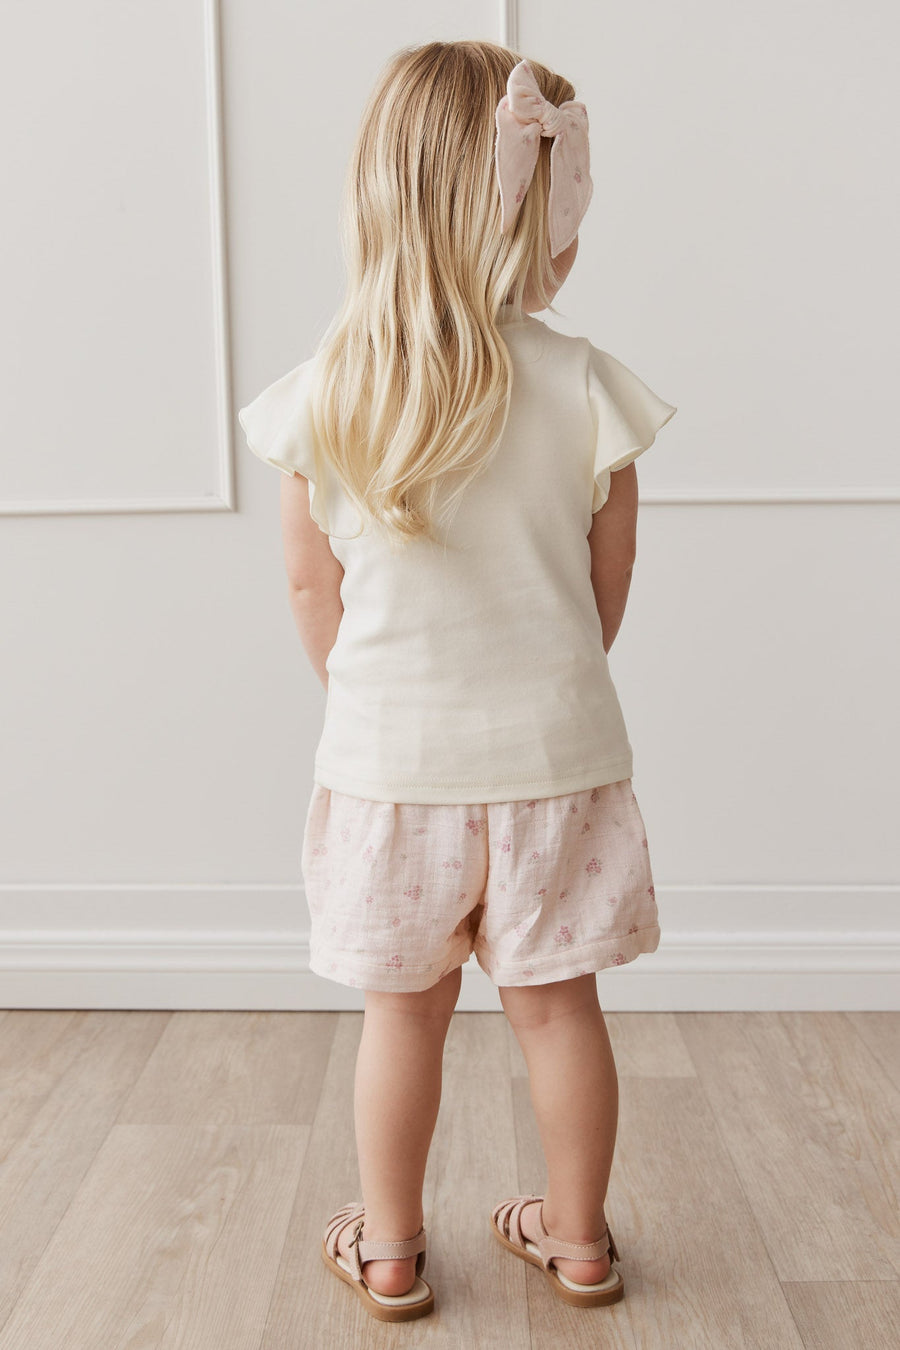 Pima Cotton Giselle Top - Parchment Childrens Top from Jamie Kay USA